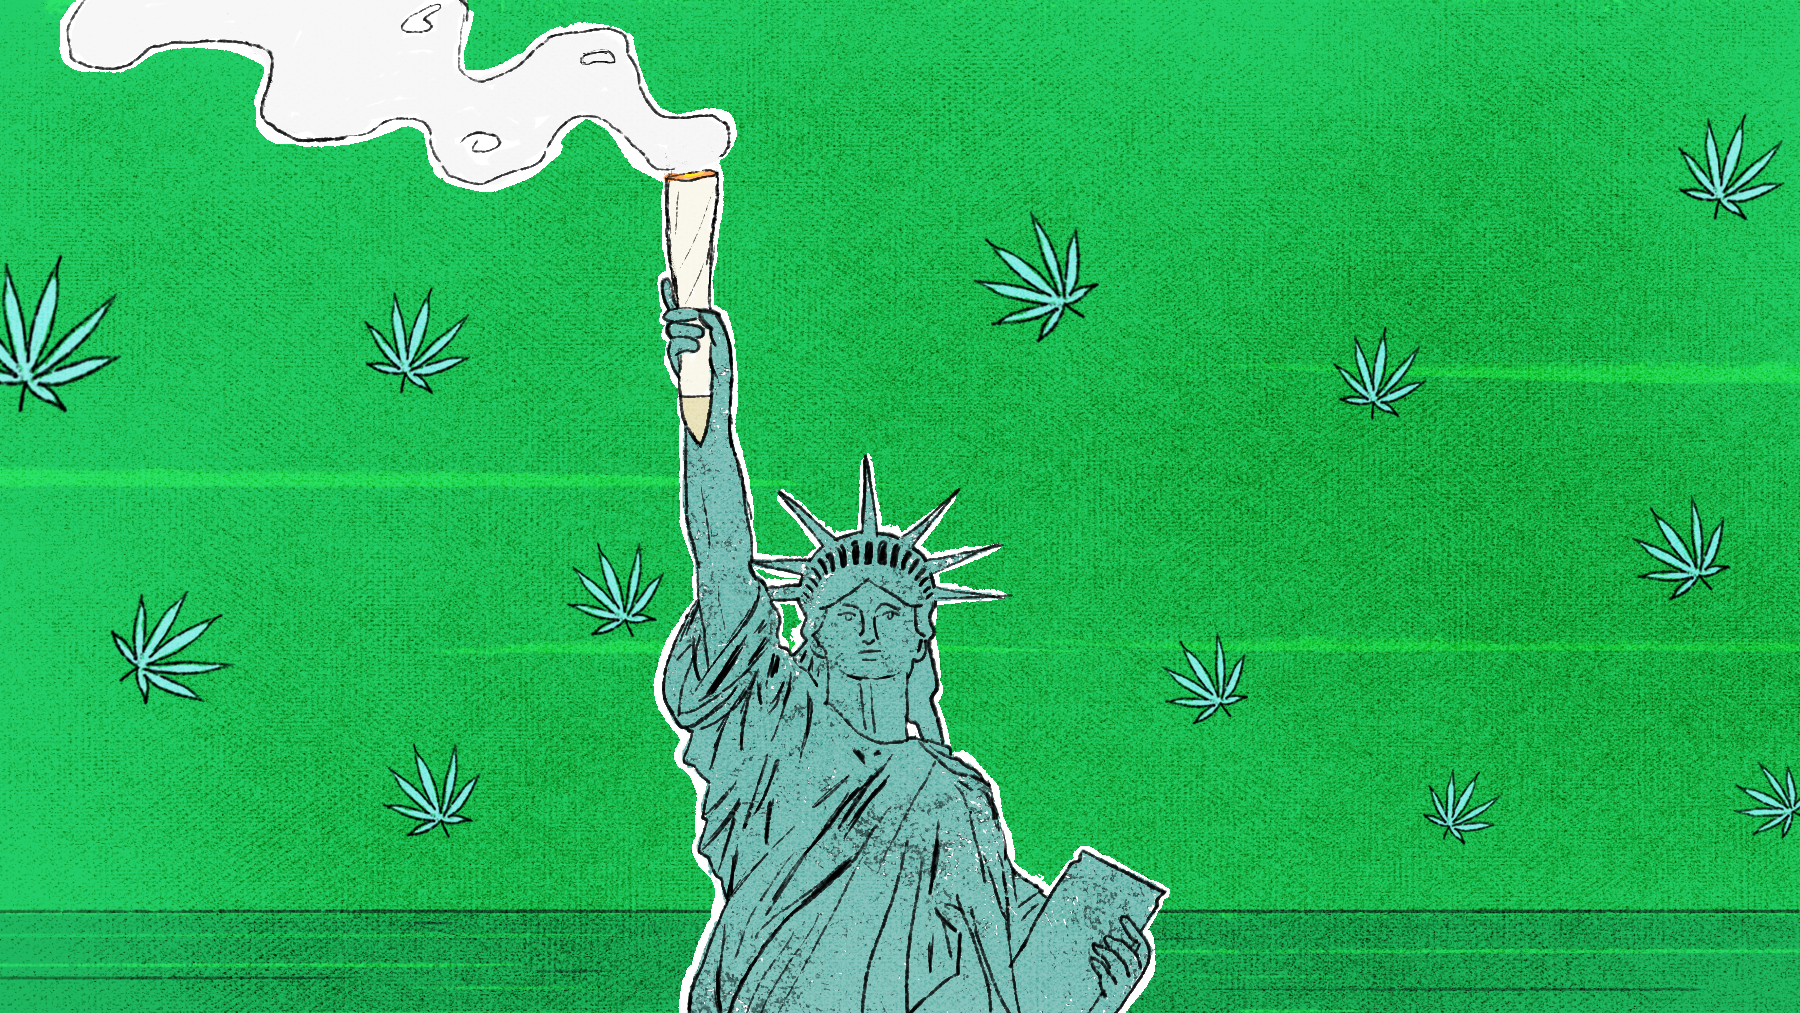 Lady Liberty holding a joint instead of a torch.